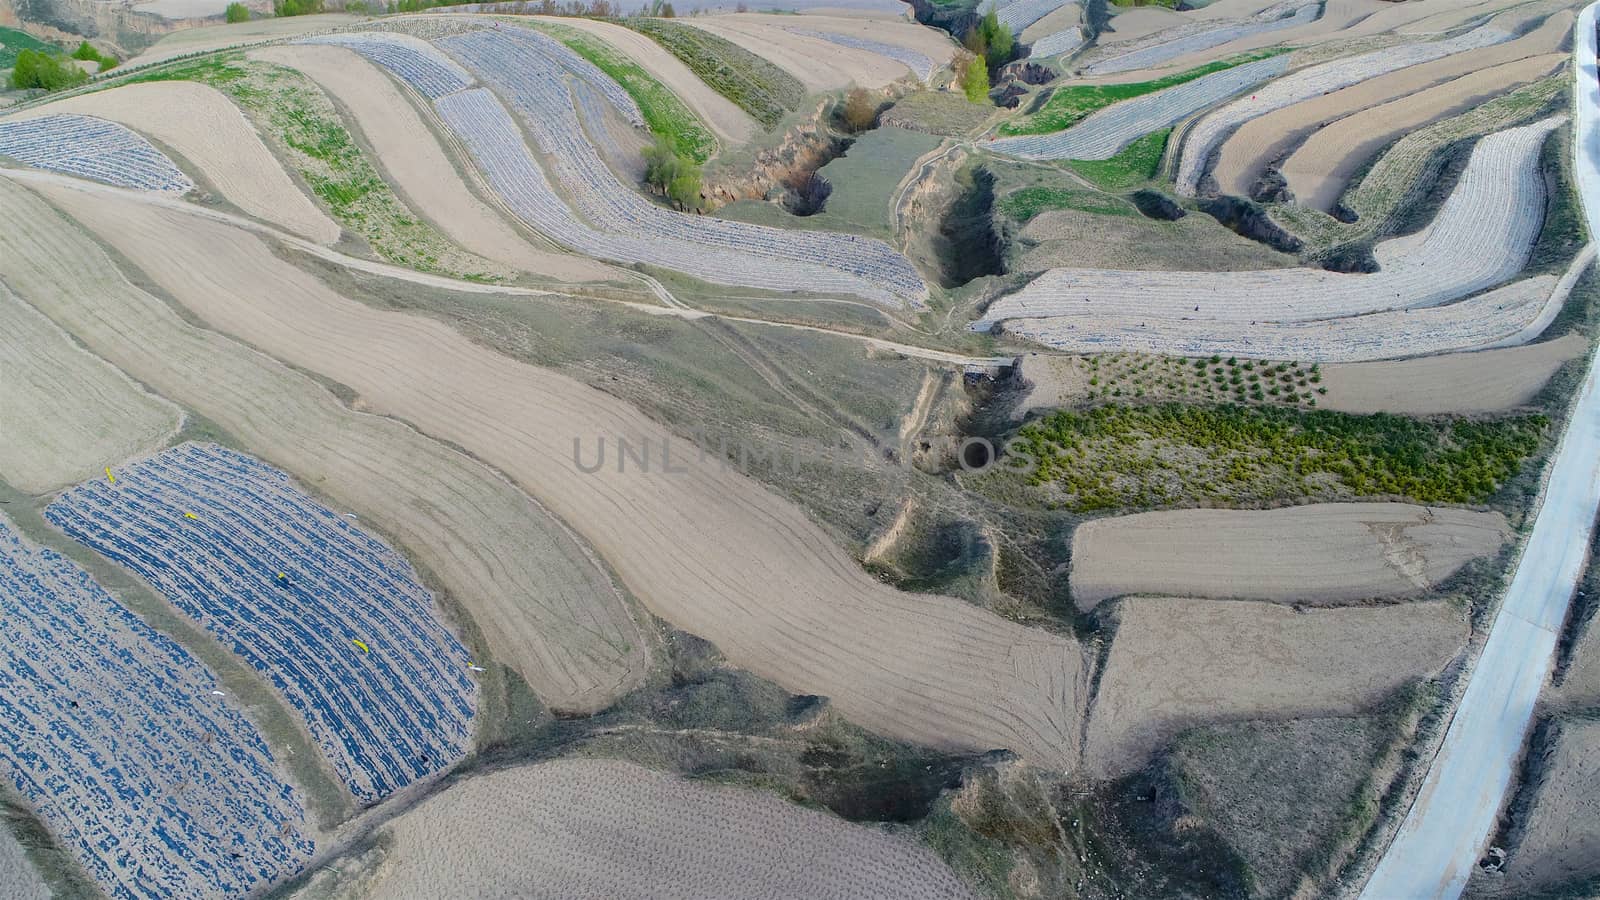 Aerial view of terraced farm field mass production during summer dry season in Tianshui, Gansu Province, China.